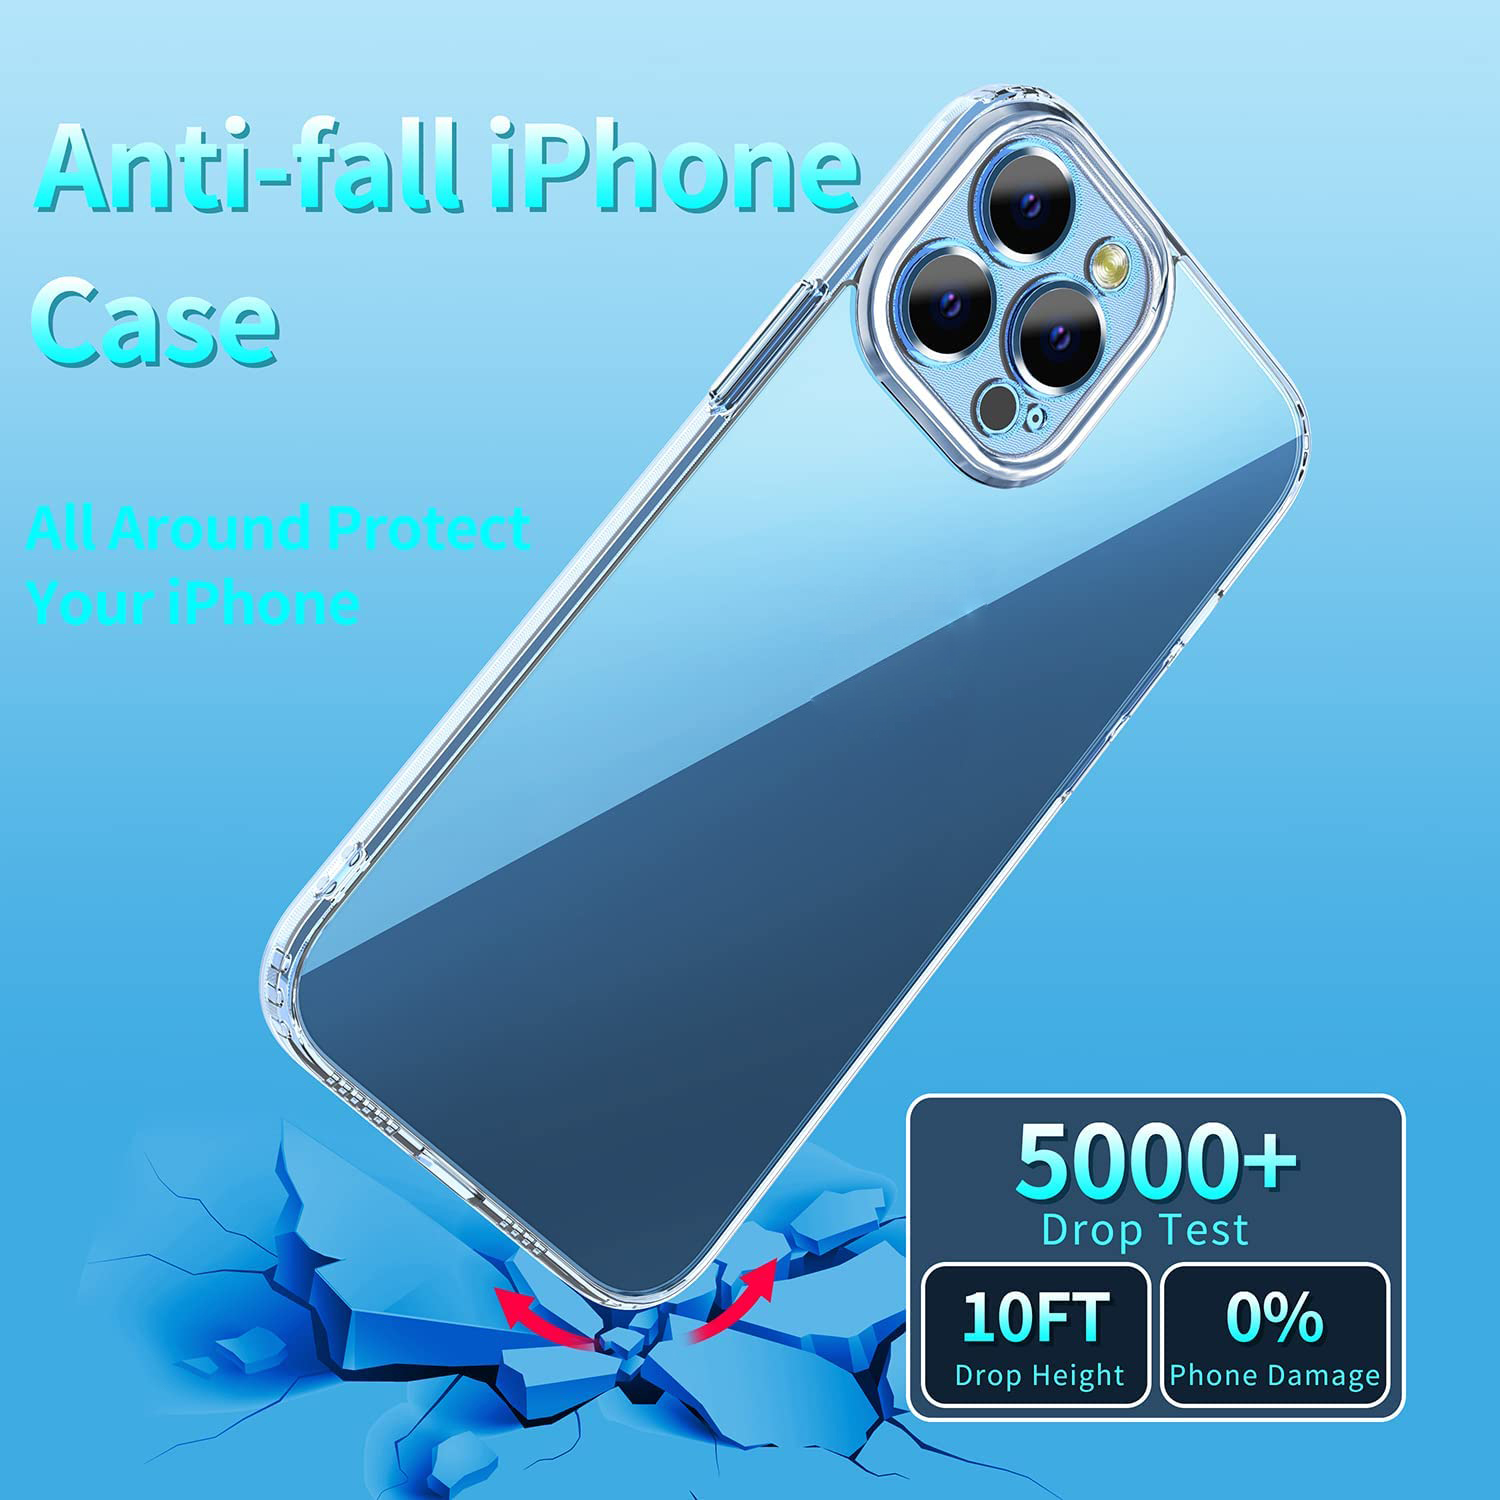 Ốp lưng chống sốc trong suốt cho iPhone 14 / 14 Plus / 14 Pro / 14 Pro Max hiệu Rock Protective Case